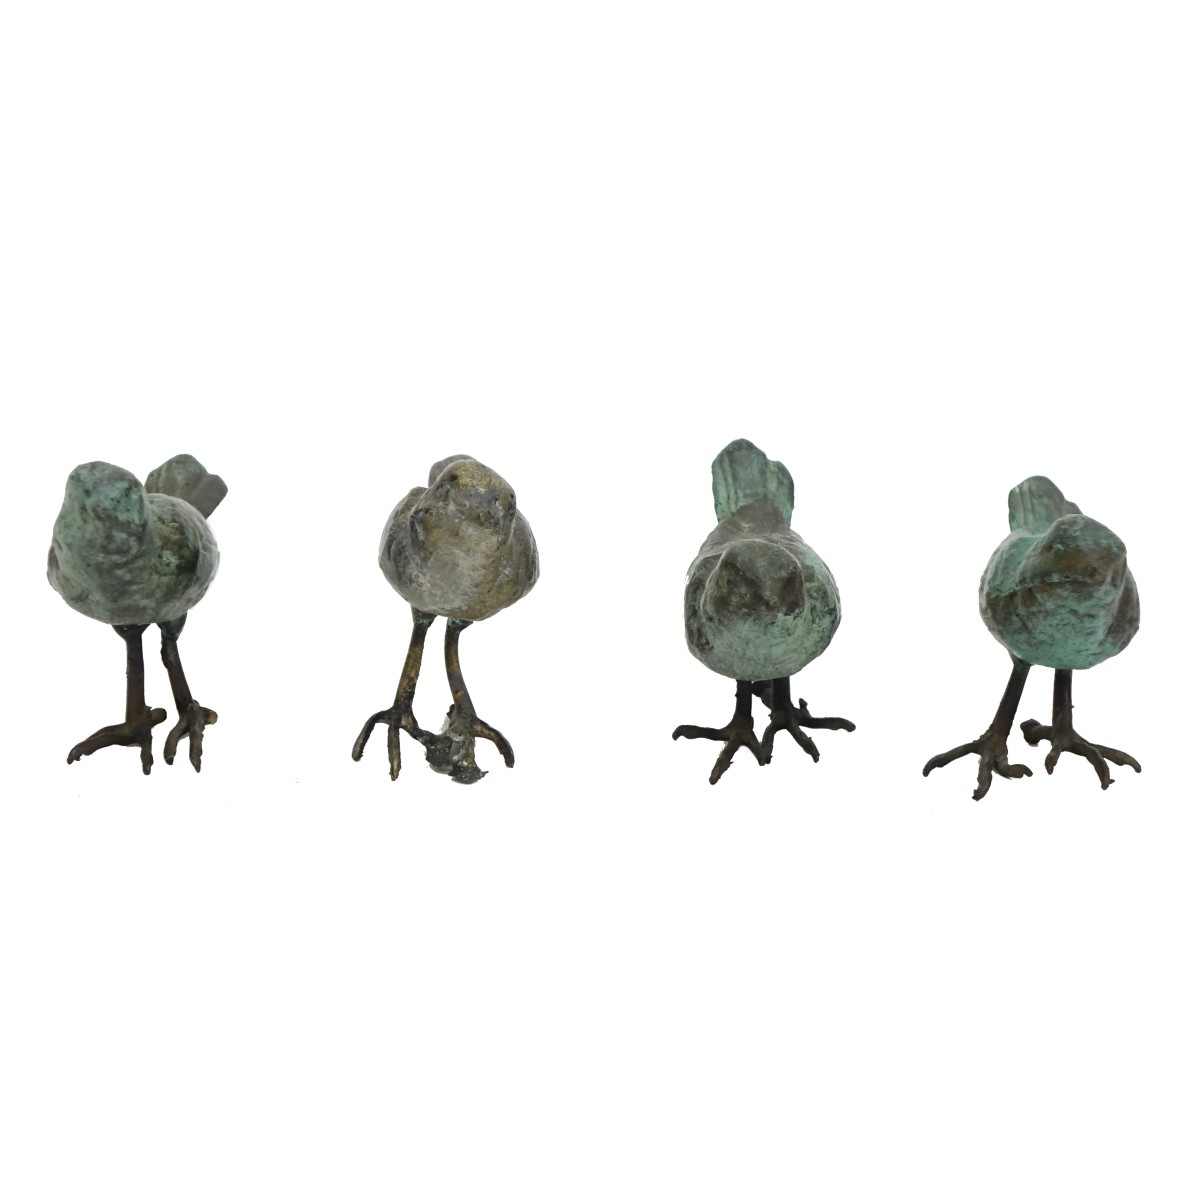 Four (4) Early 20th C. Miniature Bronze Figurines